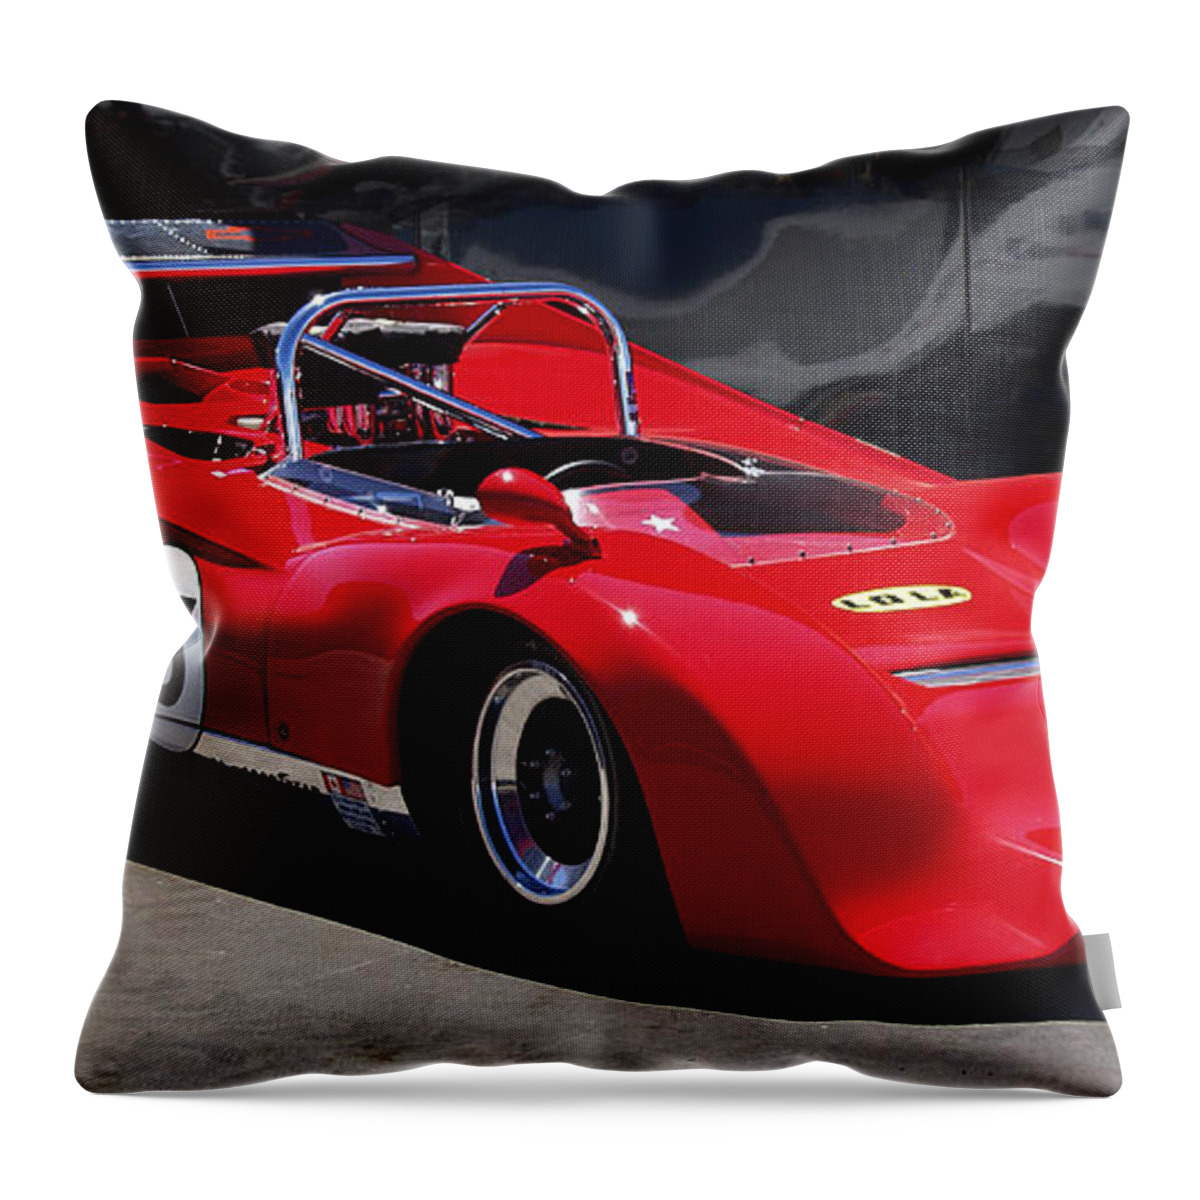 Lola Throw Pillow featuring the photograph Lola Chevrolet by Dominic Piperata